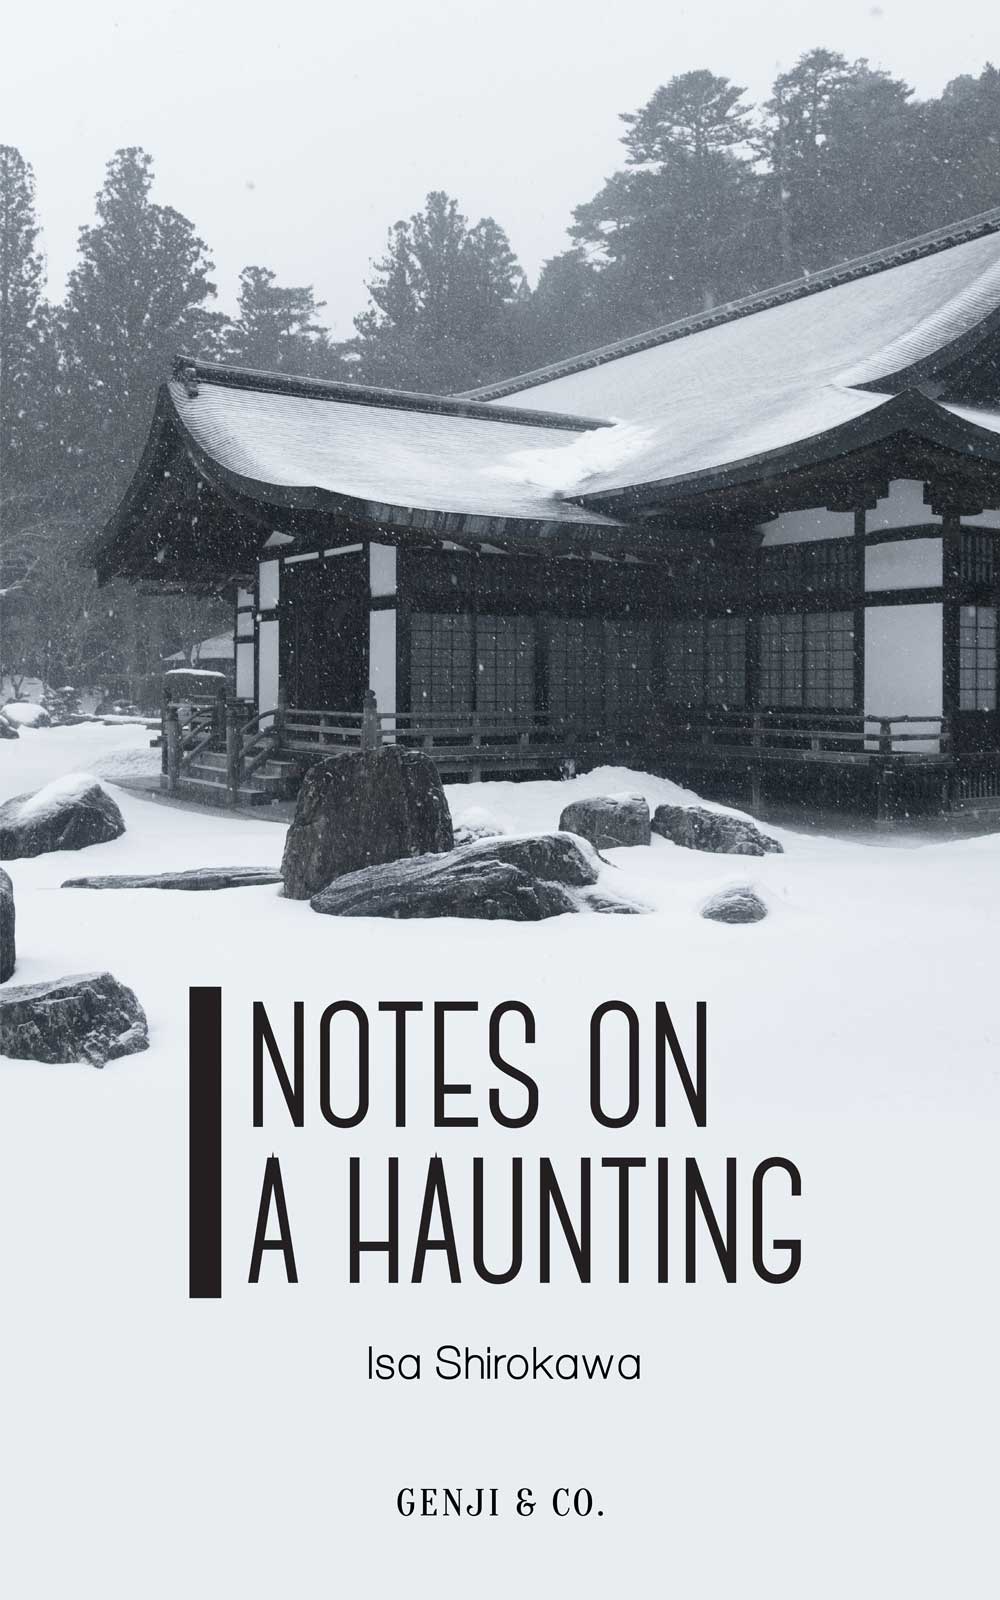 Notes on a haunting cover